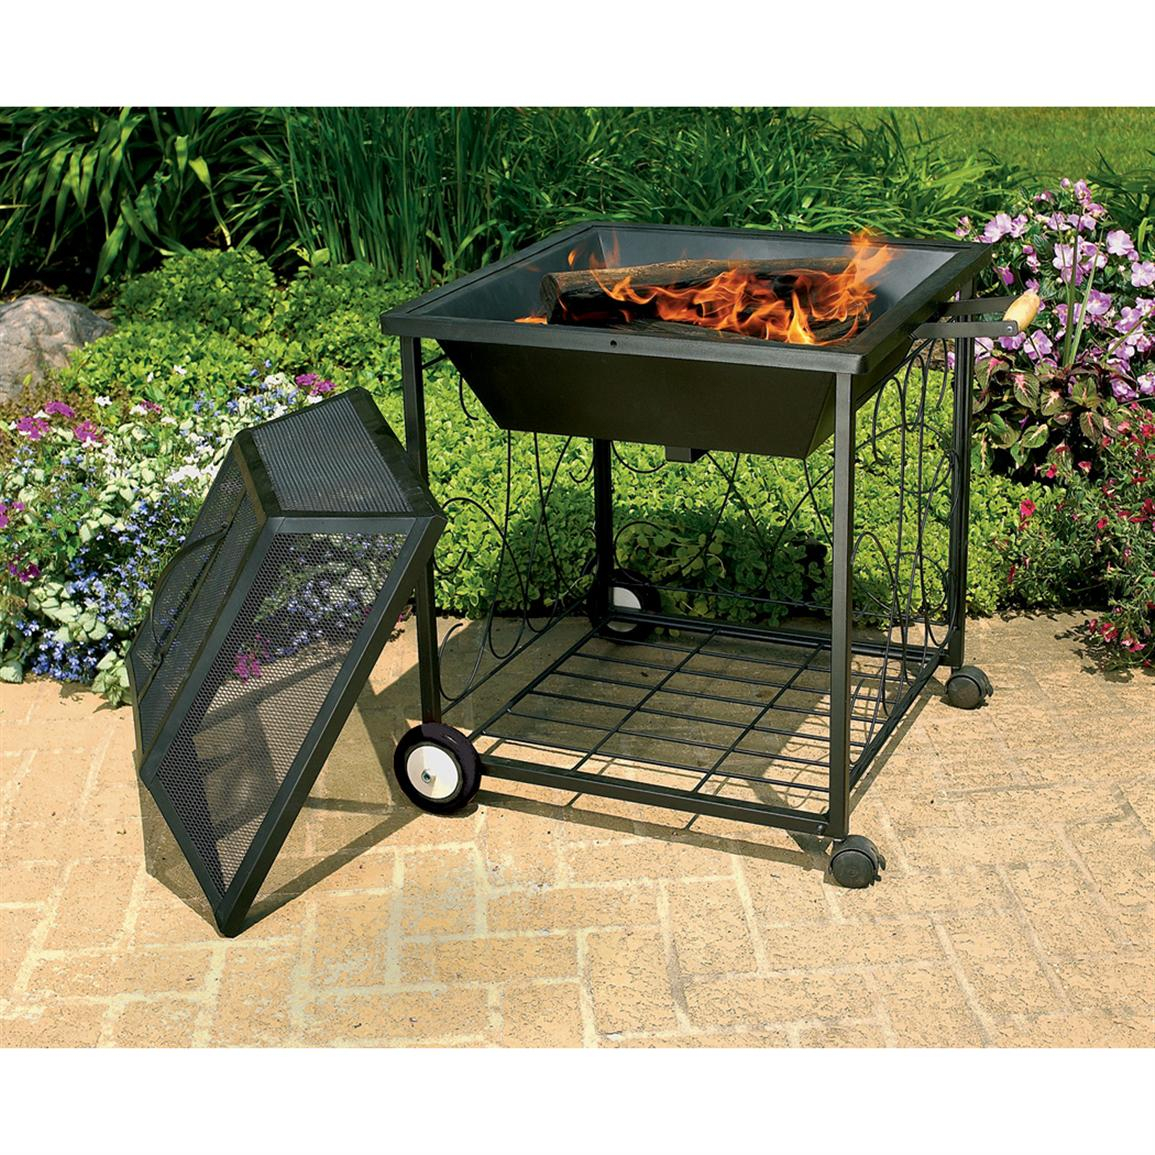 Portable Outdoor Fire Pit With Wheels Fireplace Design Ideas within proportions 1155 X 1155